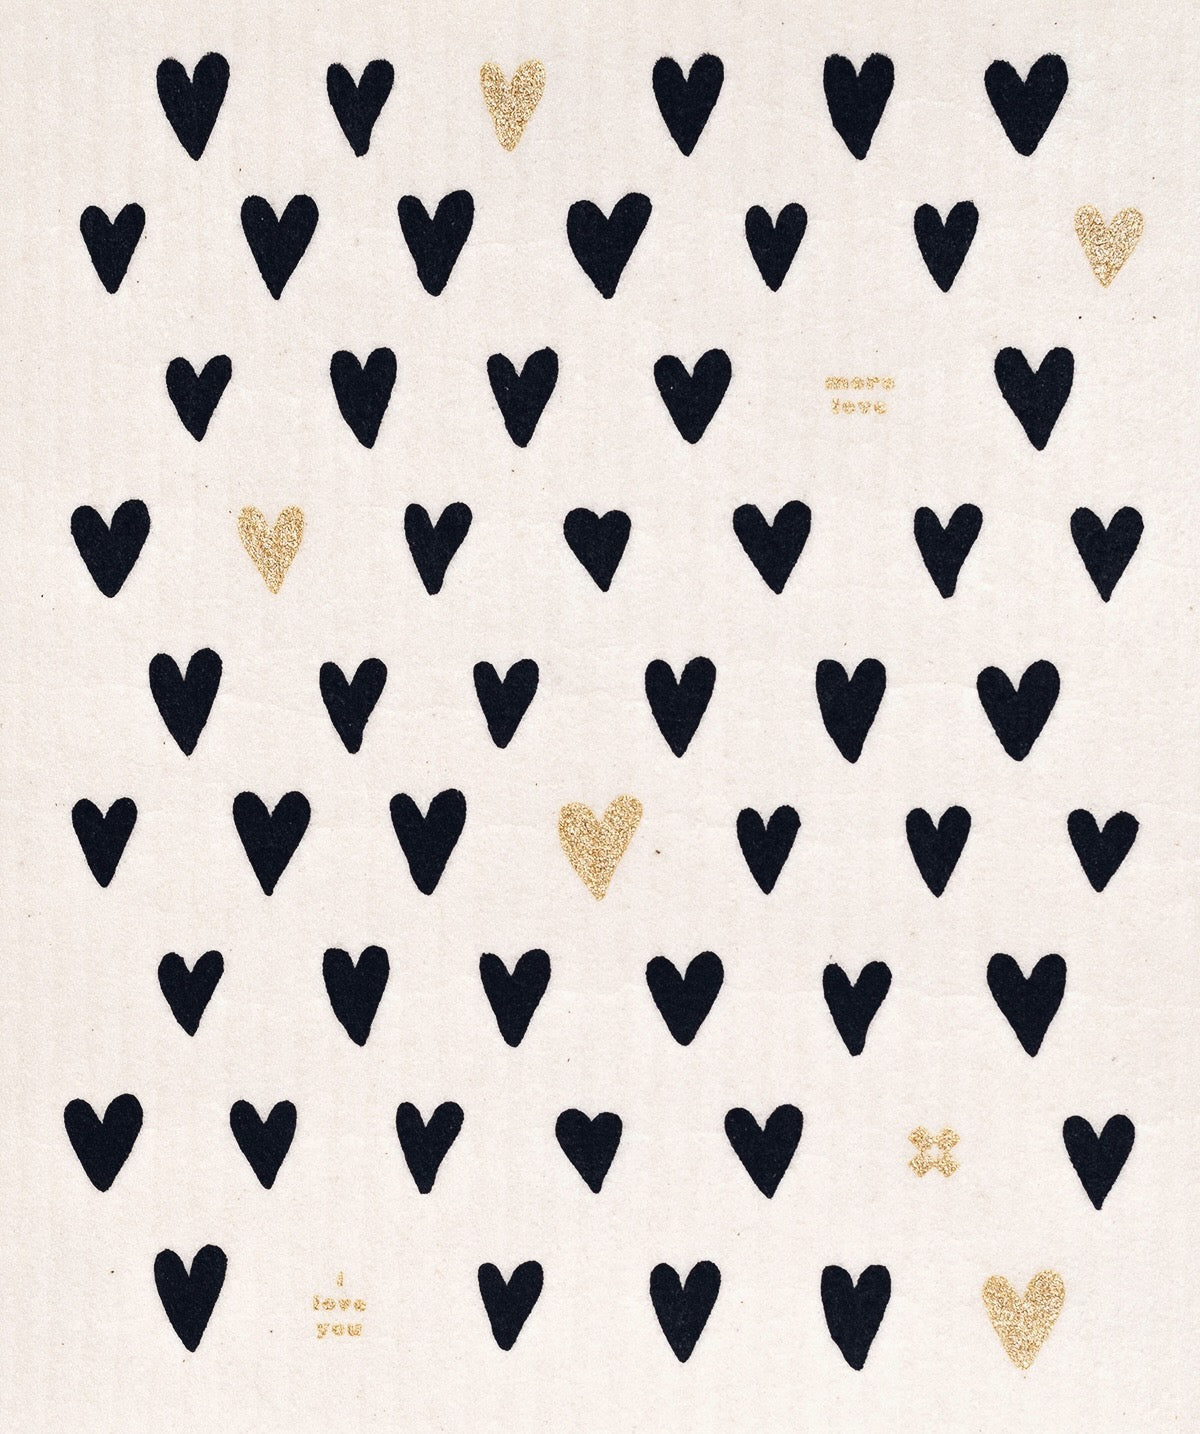 Ten and Co. Tiny Hearts Sponge Cloth in Gold and Black